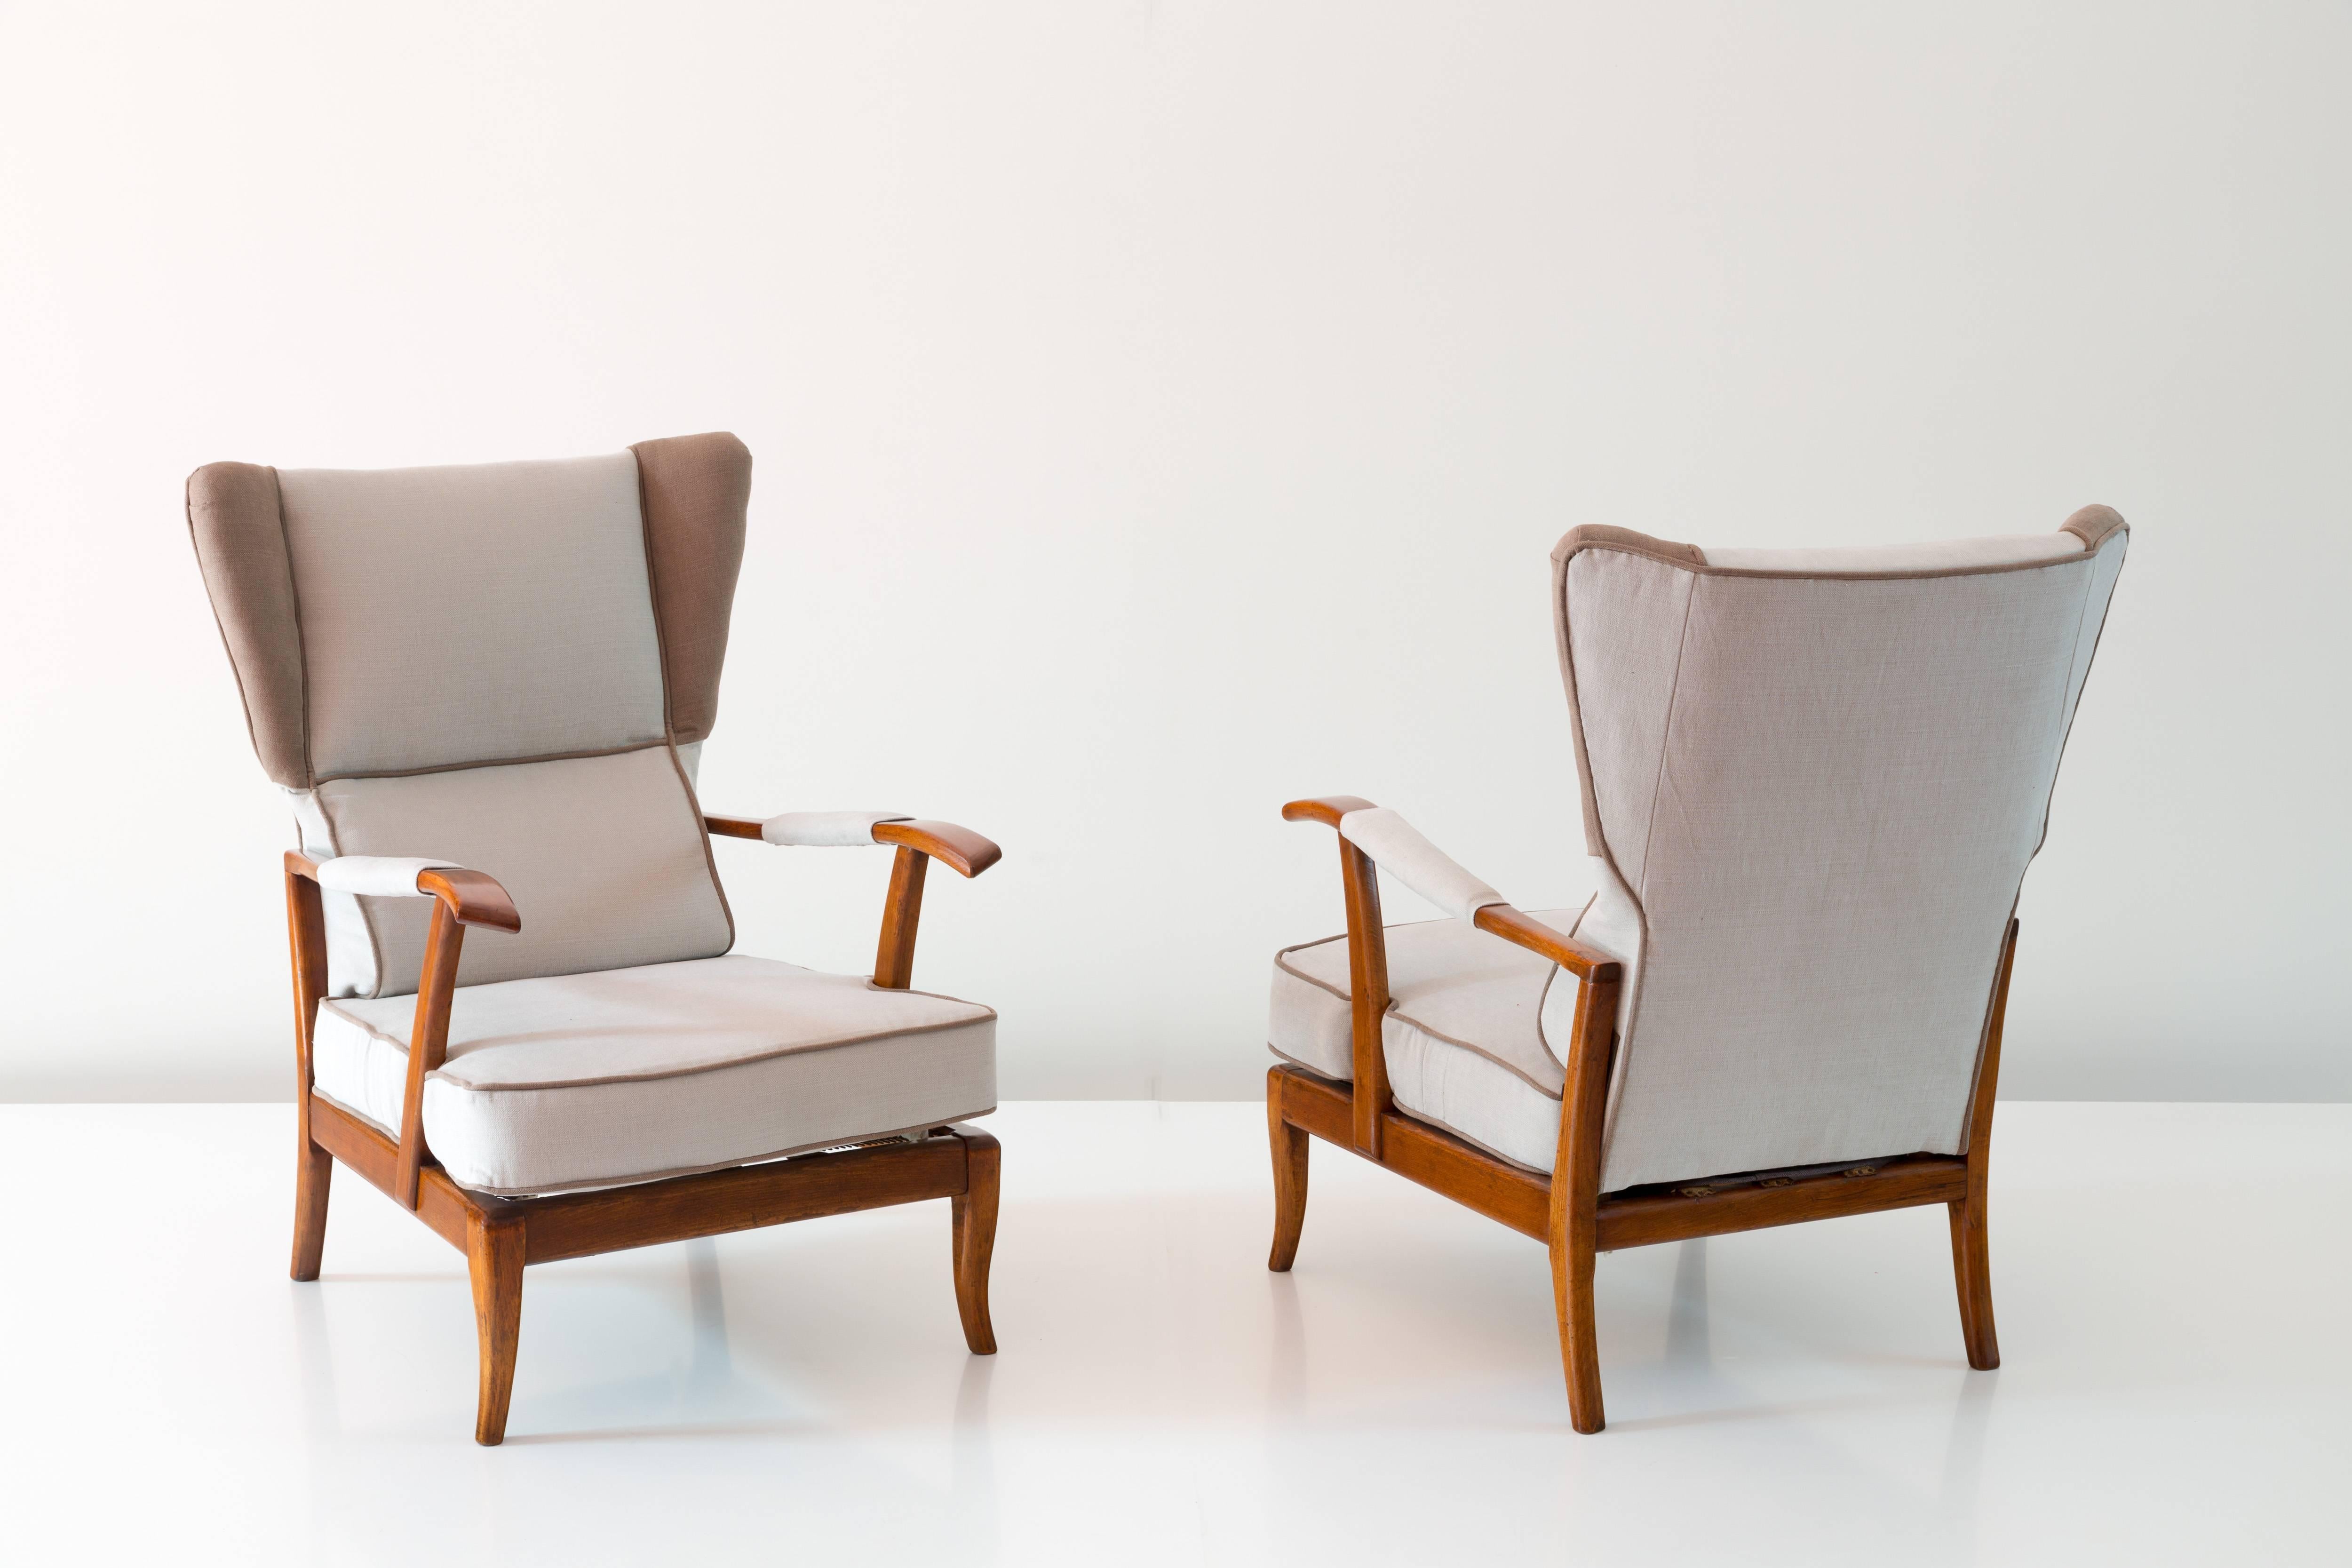 Pair of rare reclining wingback armchairs designed by Paolo Buffa, 1940.
Beechwood, ivory and brown cotton, metal.
Original structure
two different possible position.
Measures: H 95, 70 x 80 x m; height seat: 46 cm.
Very good